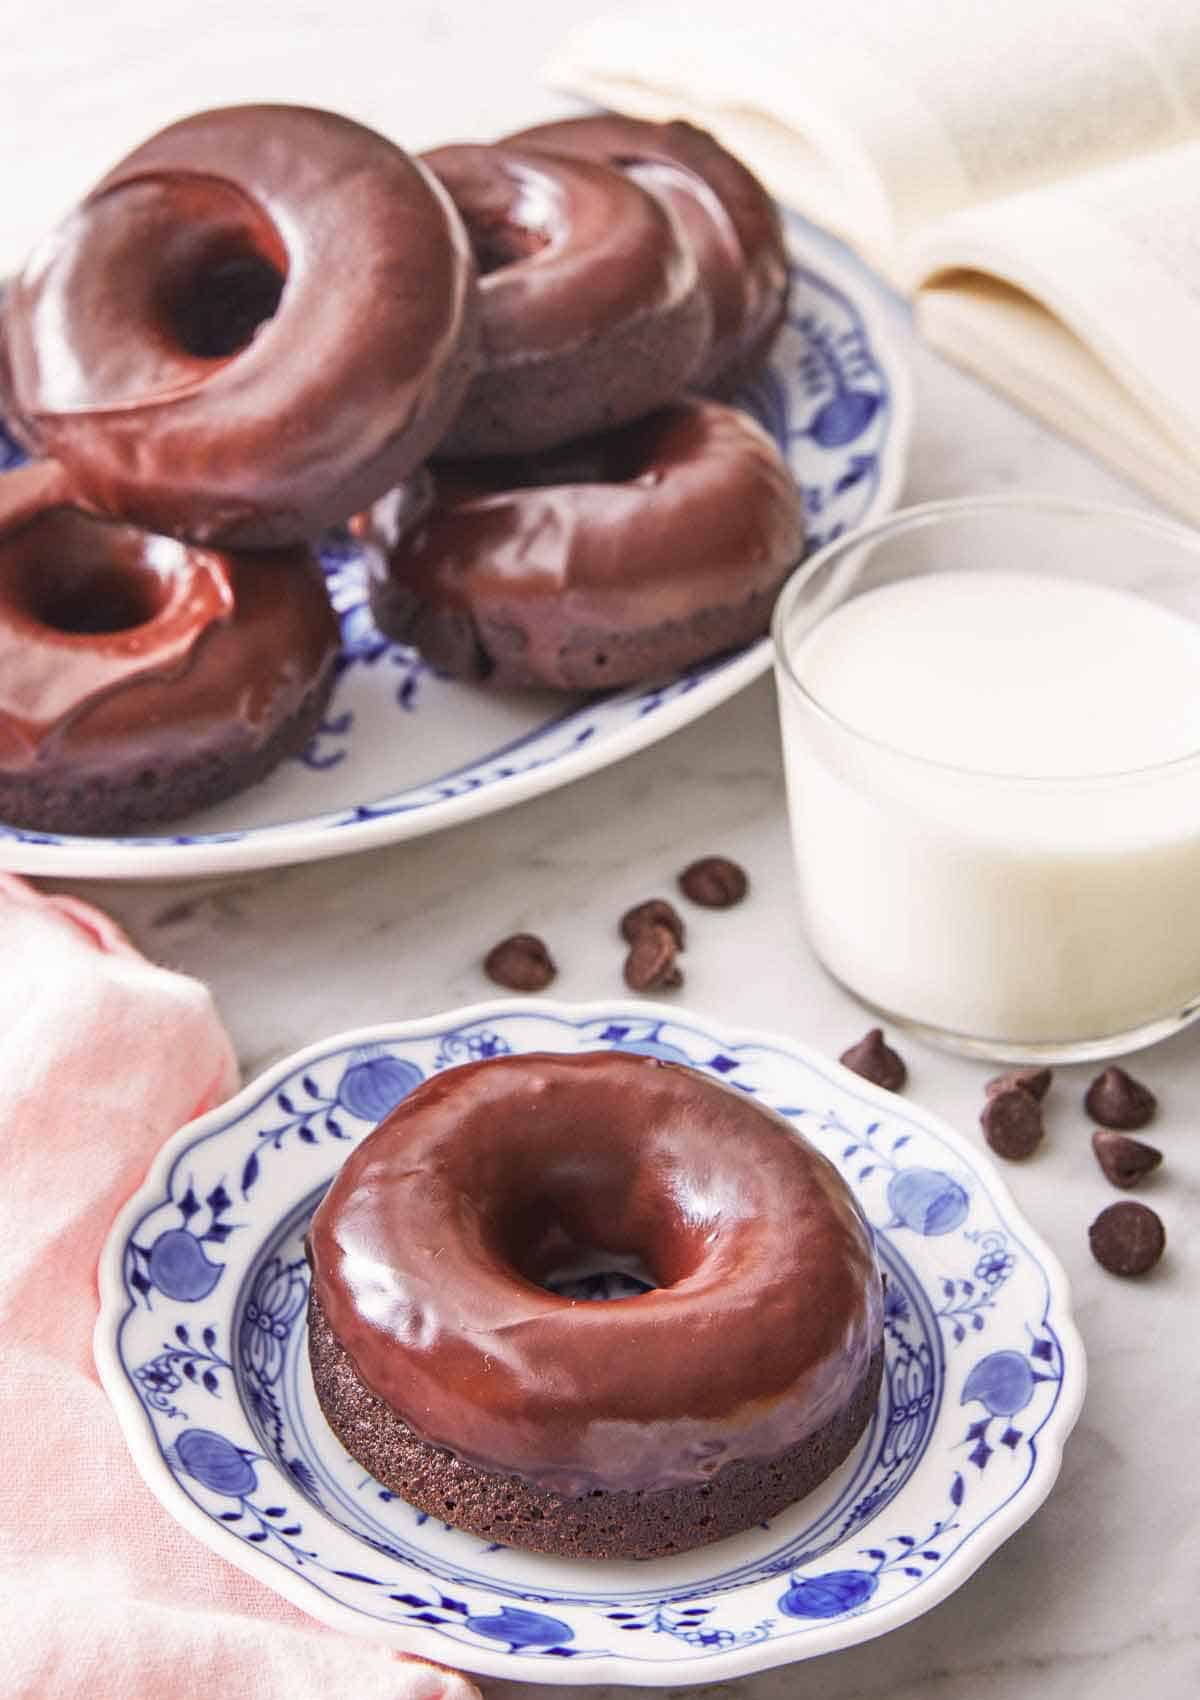 A plate with a chocolate donut by a glass of milk and additional donuts in the back.